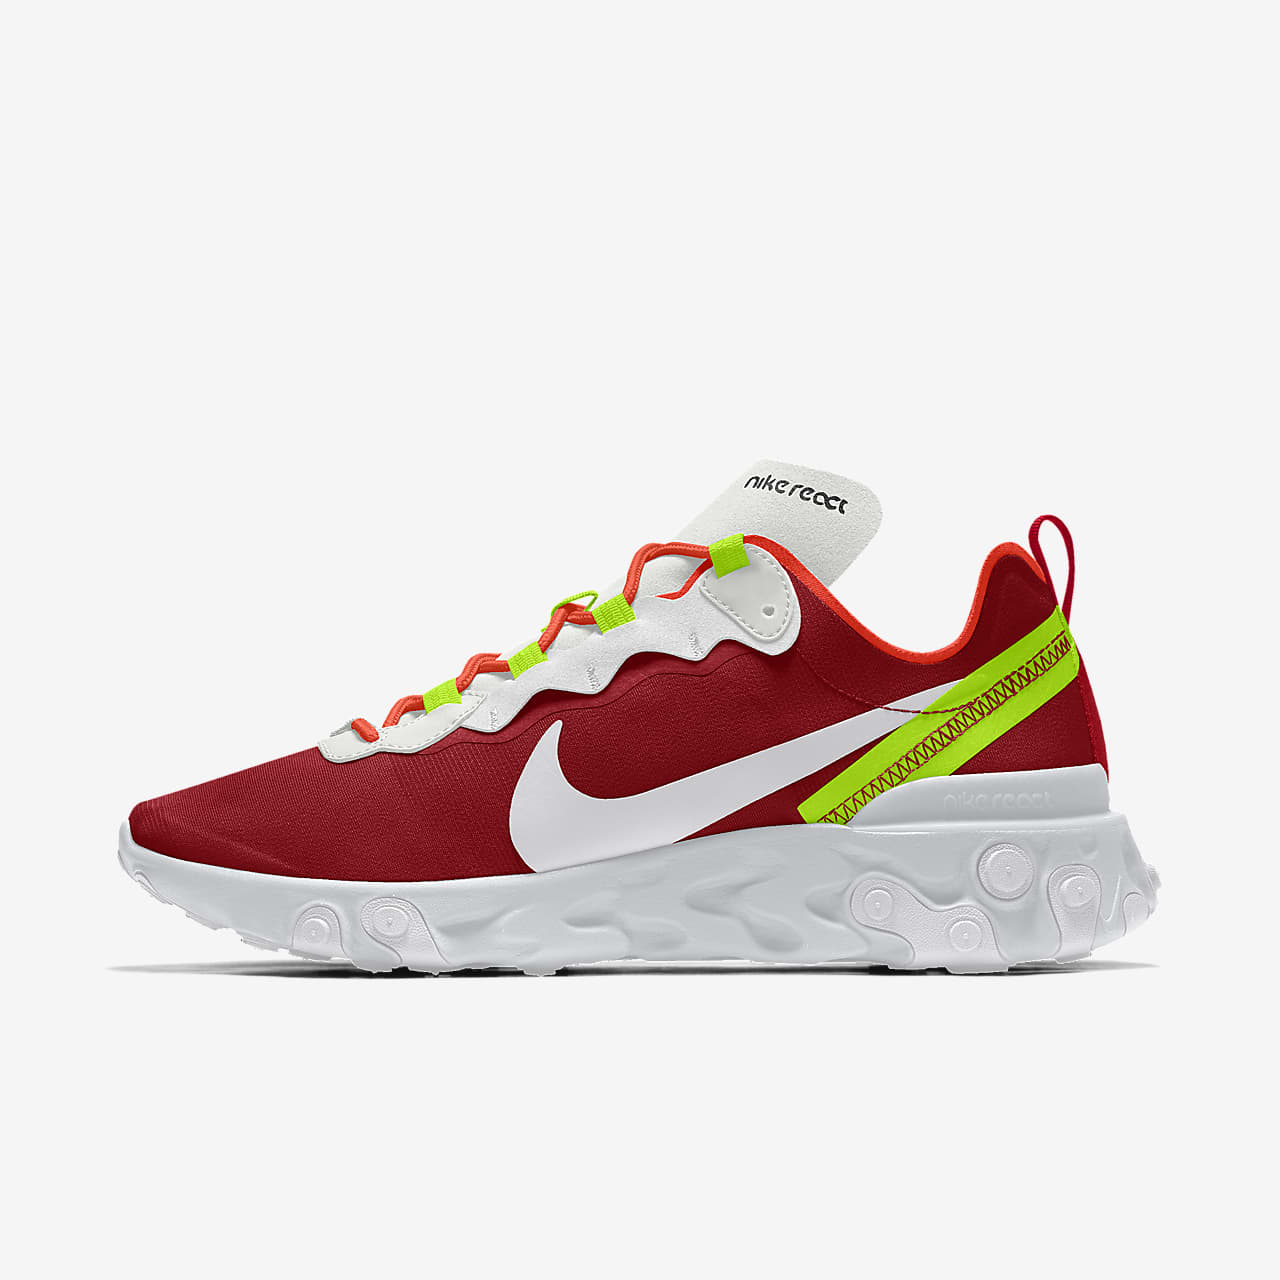 Chaussure lifestyle personnalisable Nike React Element 55 By You ...